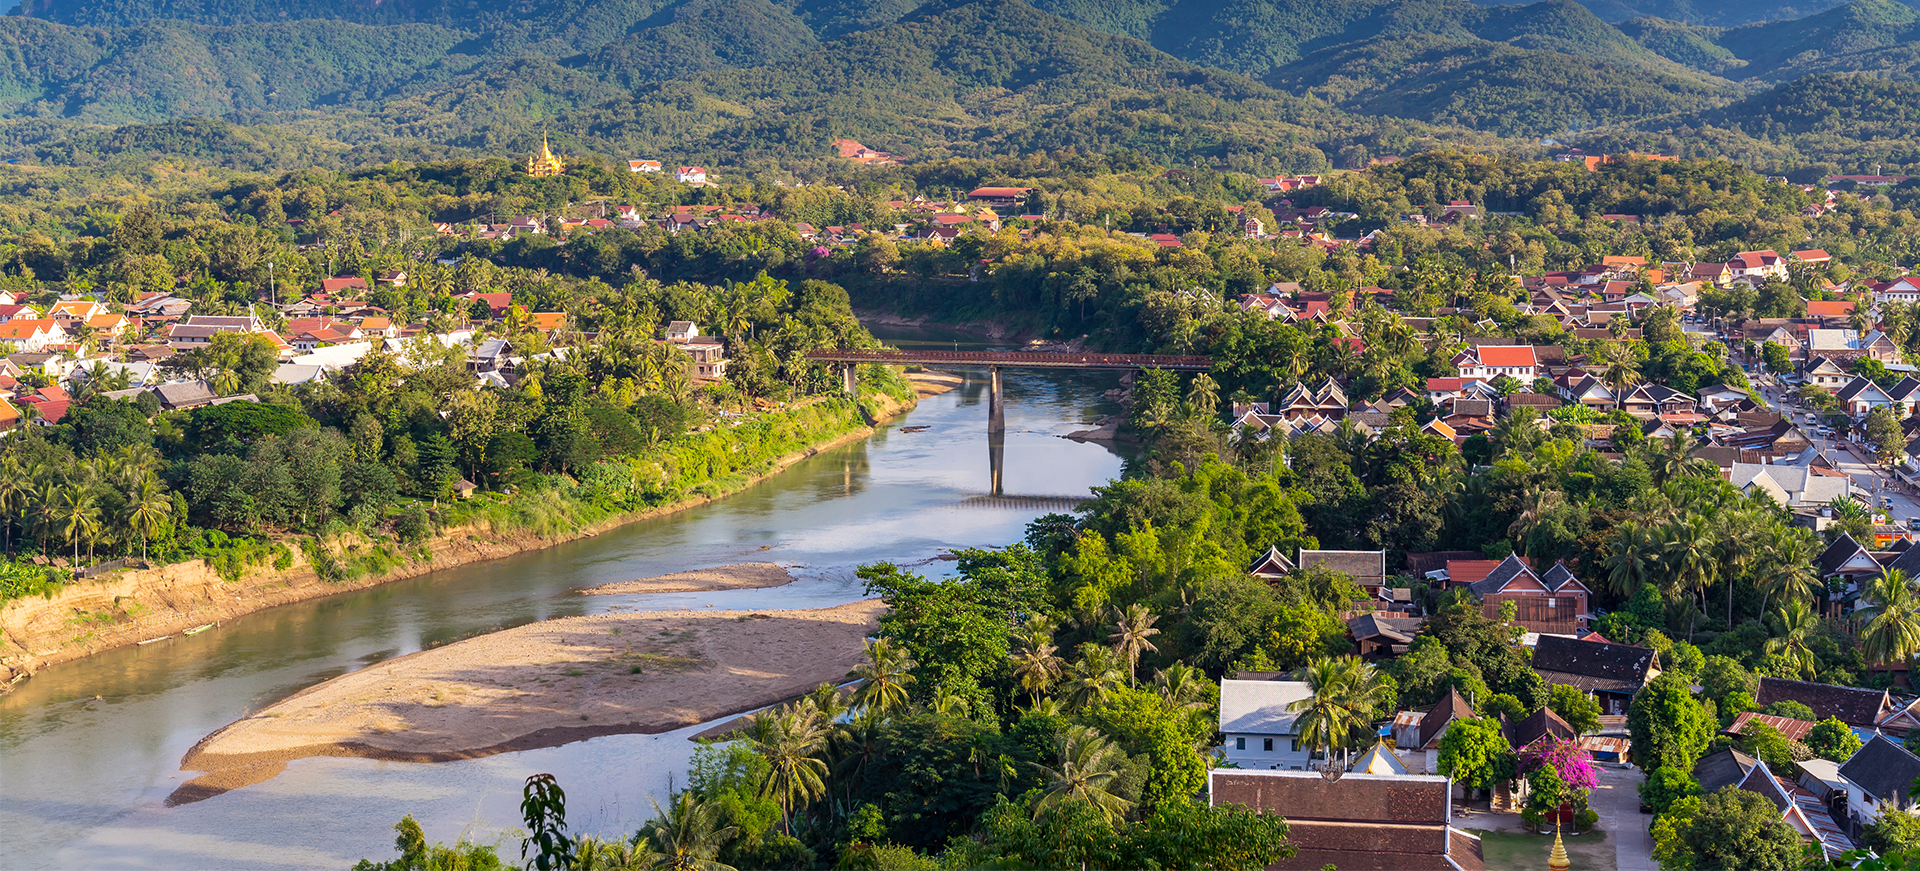 Laos-in-style-Thumb-Resize-H.jpg